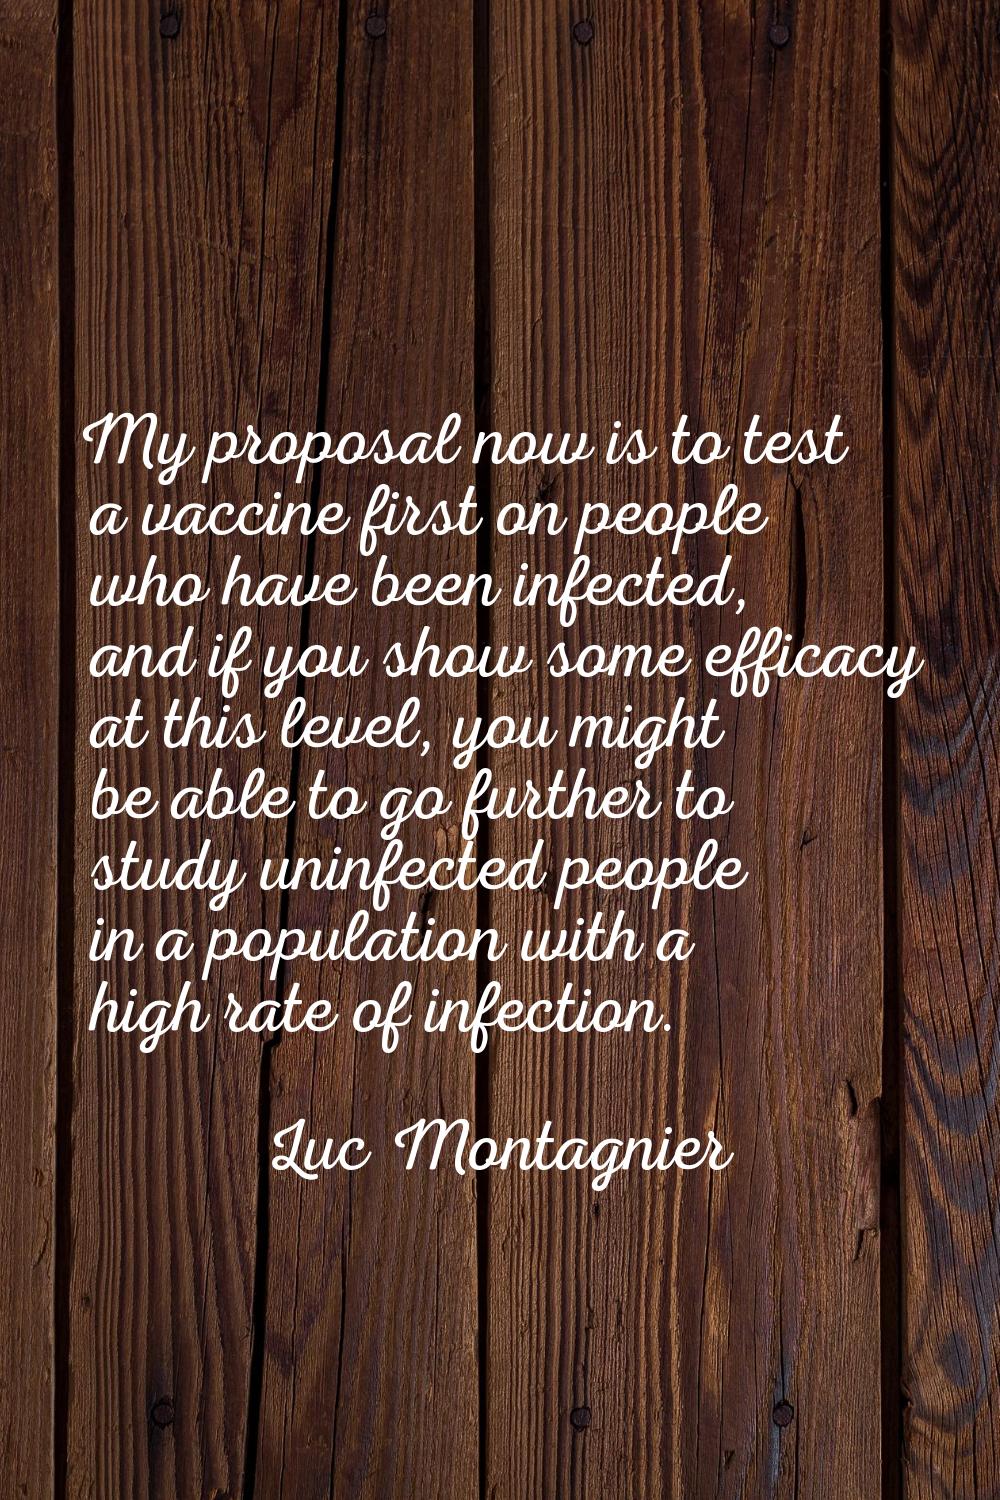 My proposal now is to test a vaccine first on people who have been infected, and if you show some e